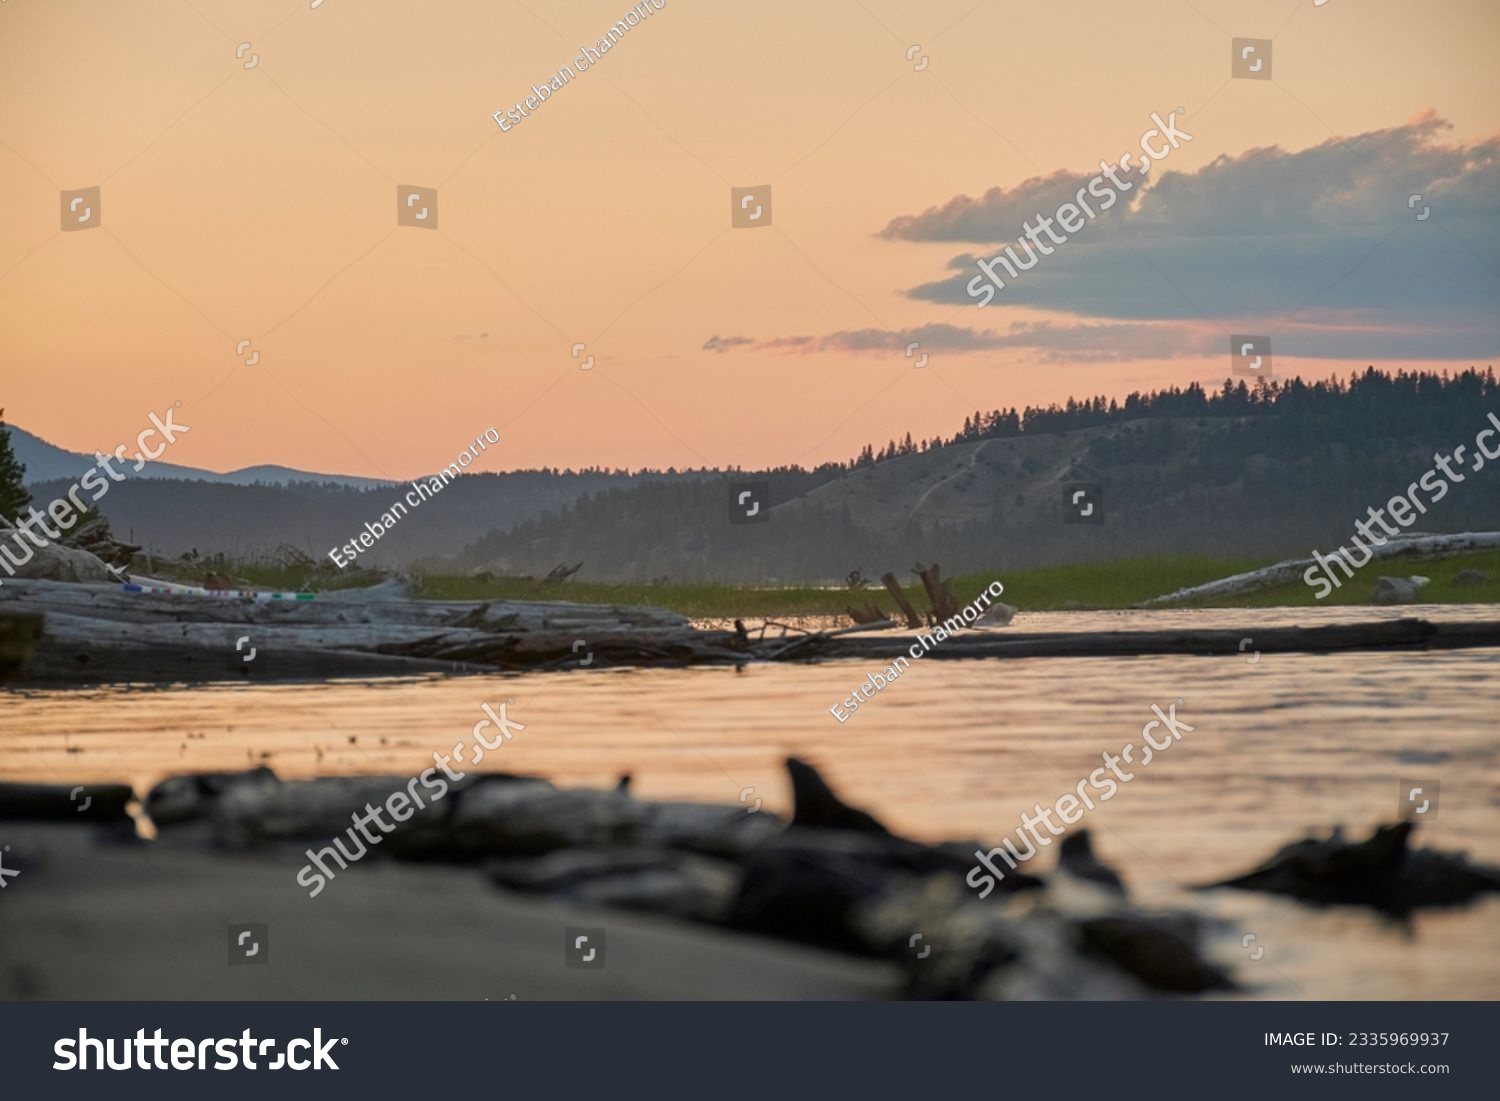 At ground level on large white sandy beach large lake full of large white wooden logs small grassy islands orange sunset large white clouds over the mountains #2335969937